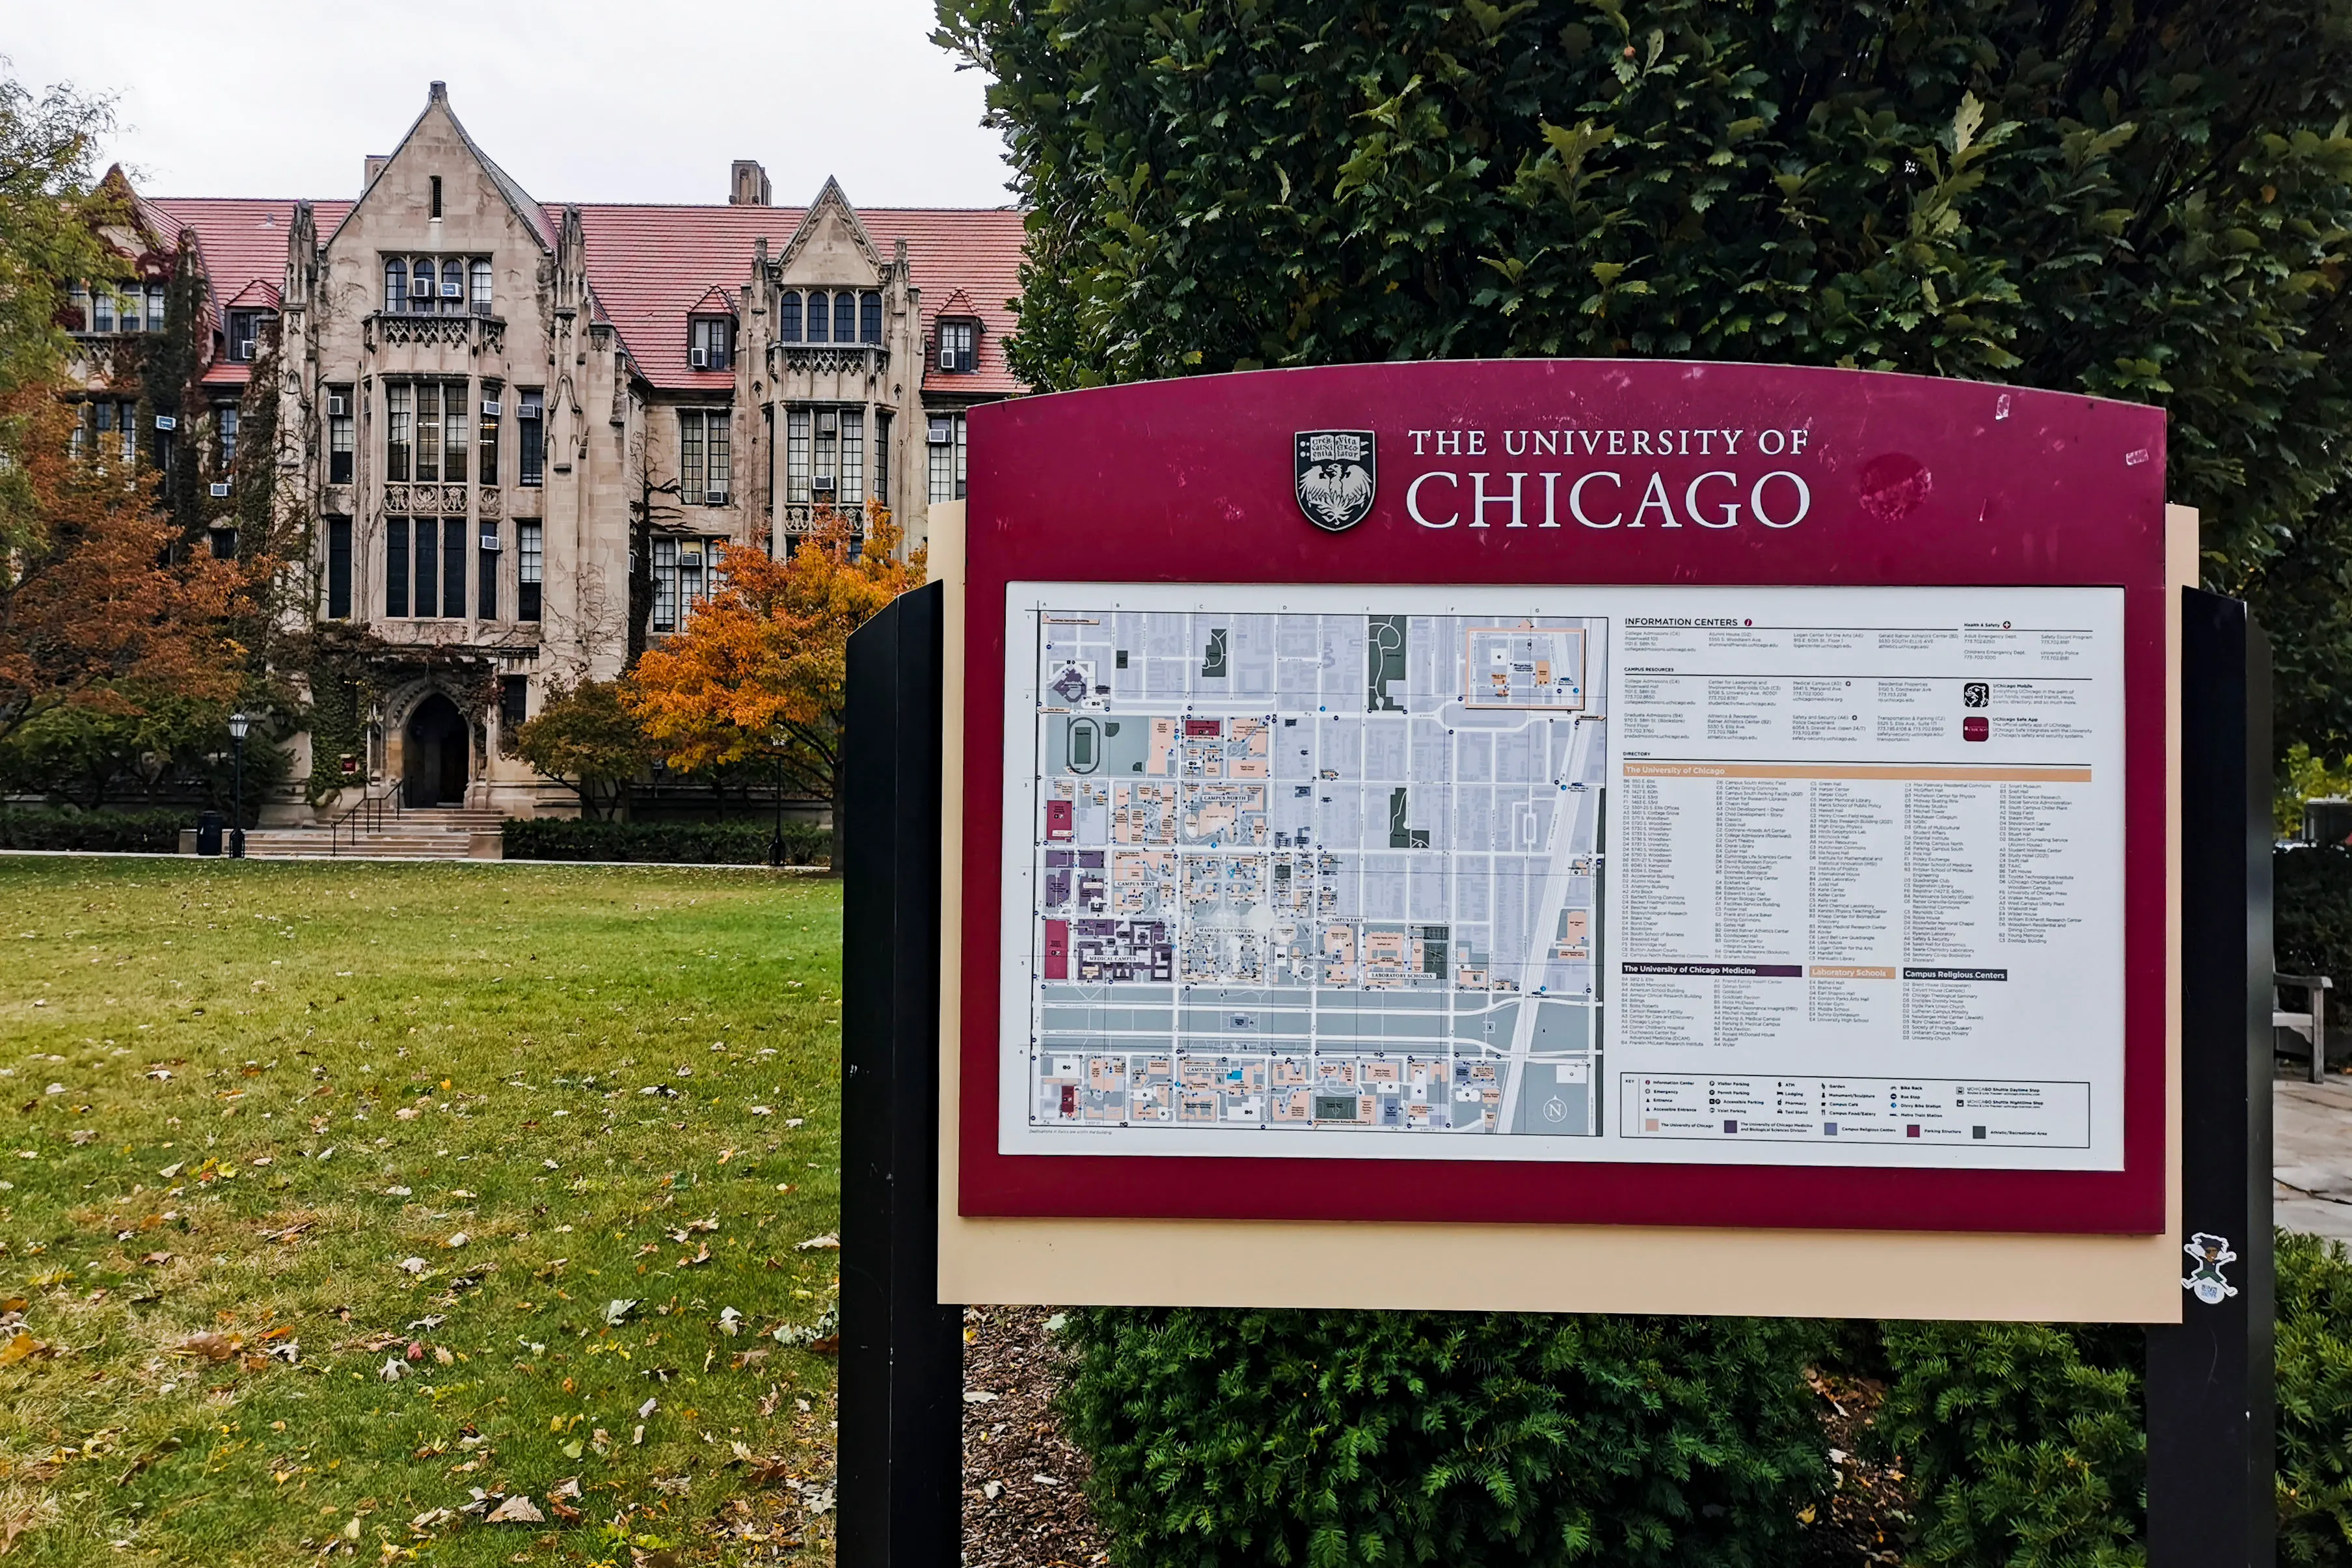 'Is God queer?': University of Chicago offers 'Queering God' course to study reimagining of gender in theology